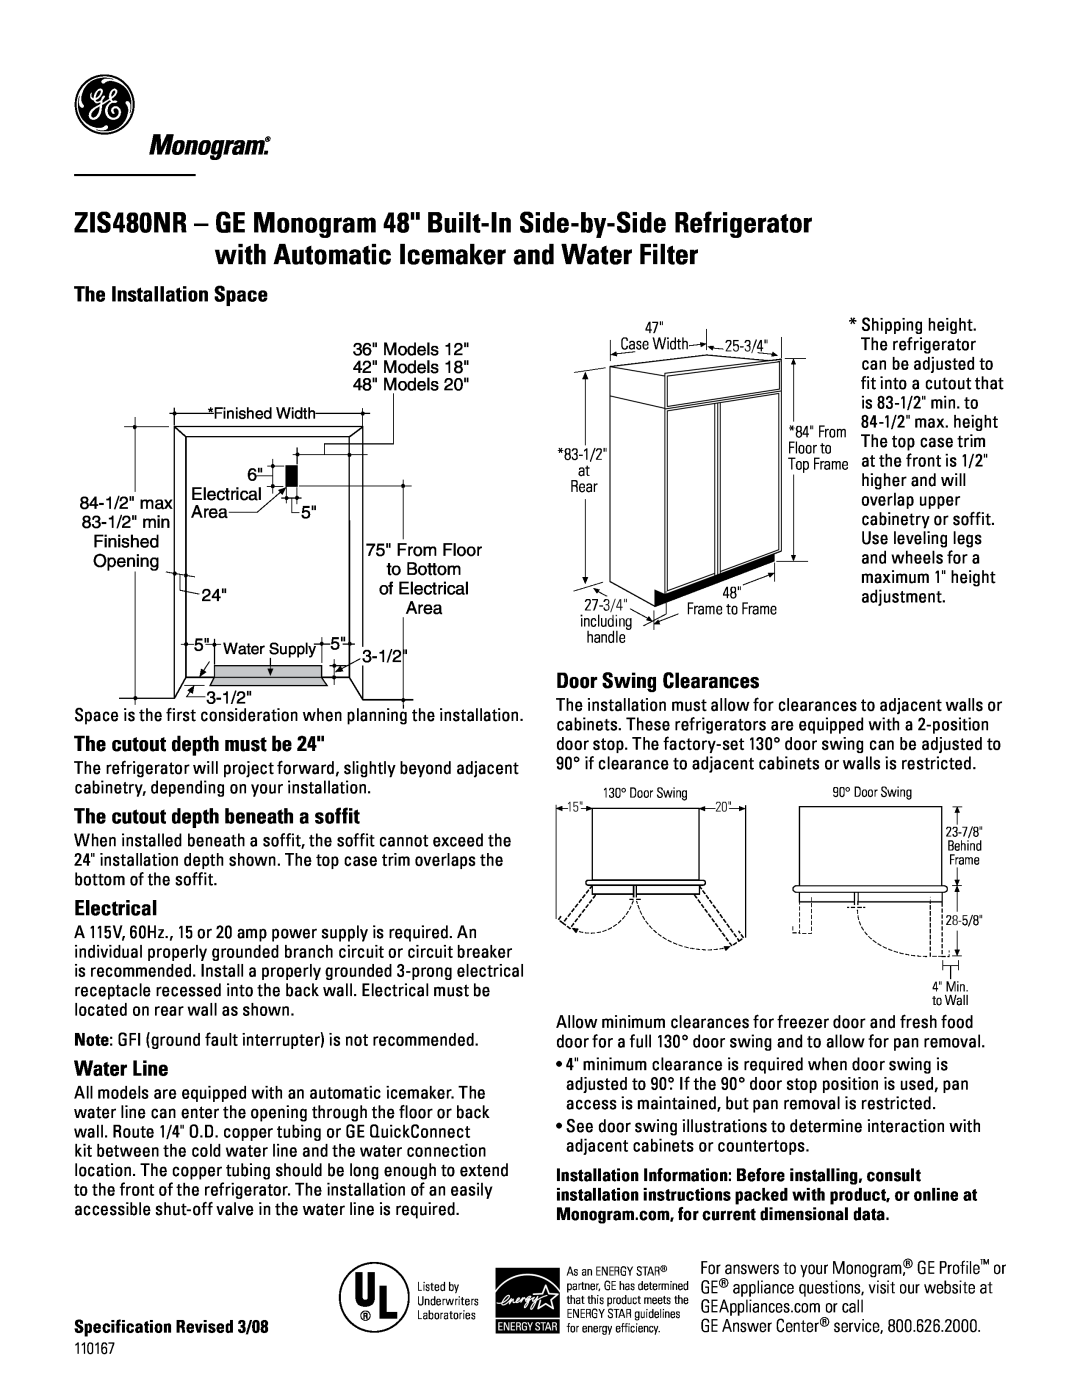 GE Monogram ZIS480NR installation instructions The Installation Space, The cutout depth must be, Door Swing Clearances 